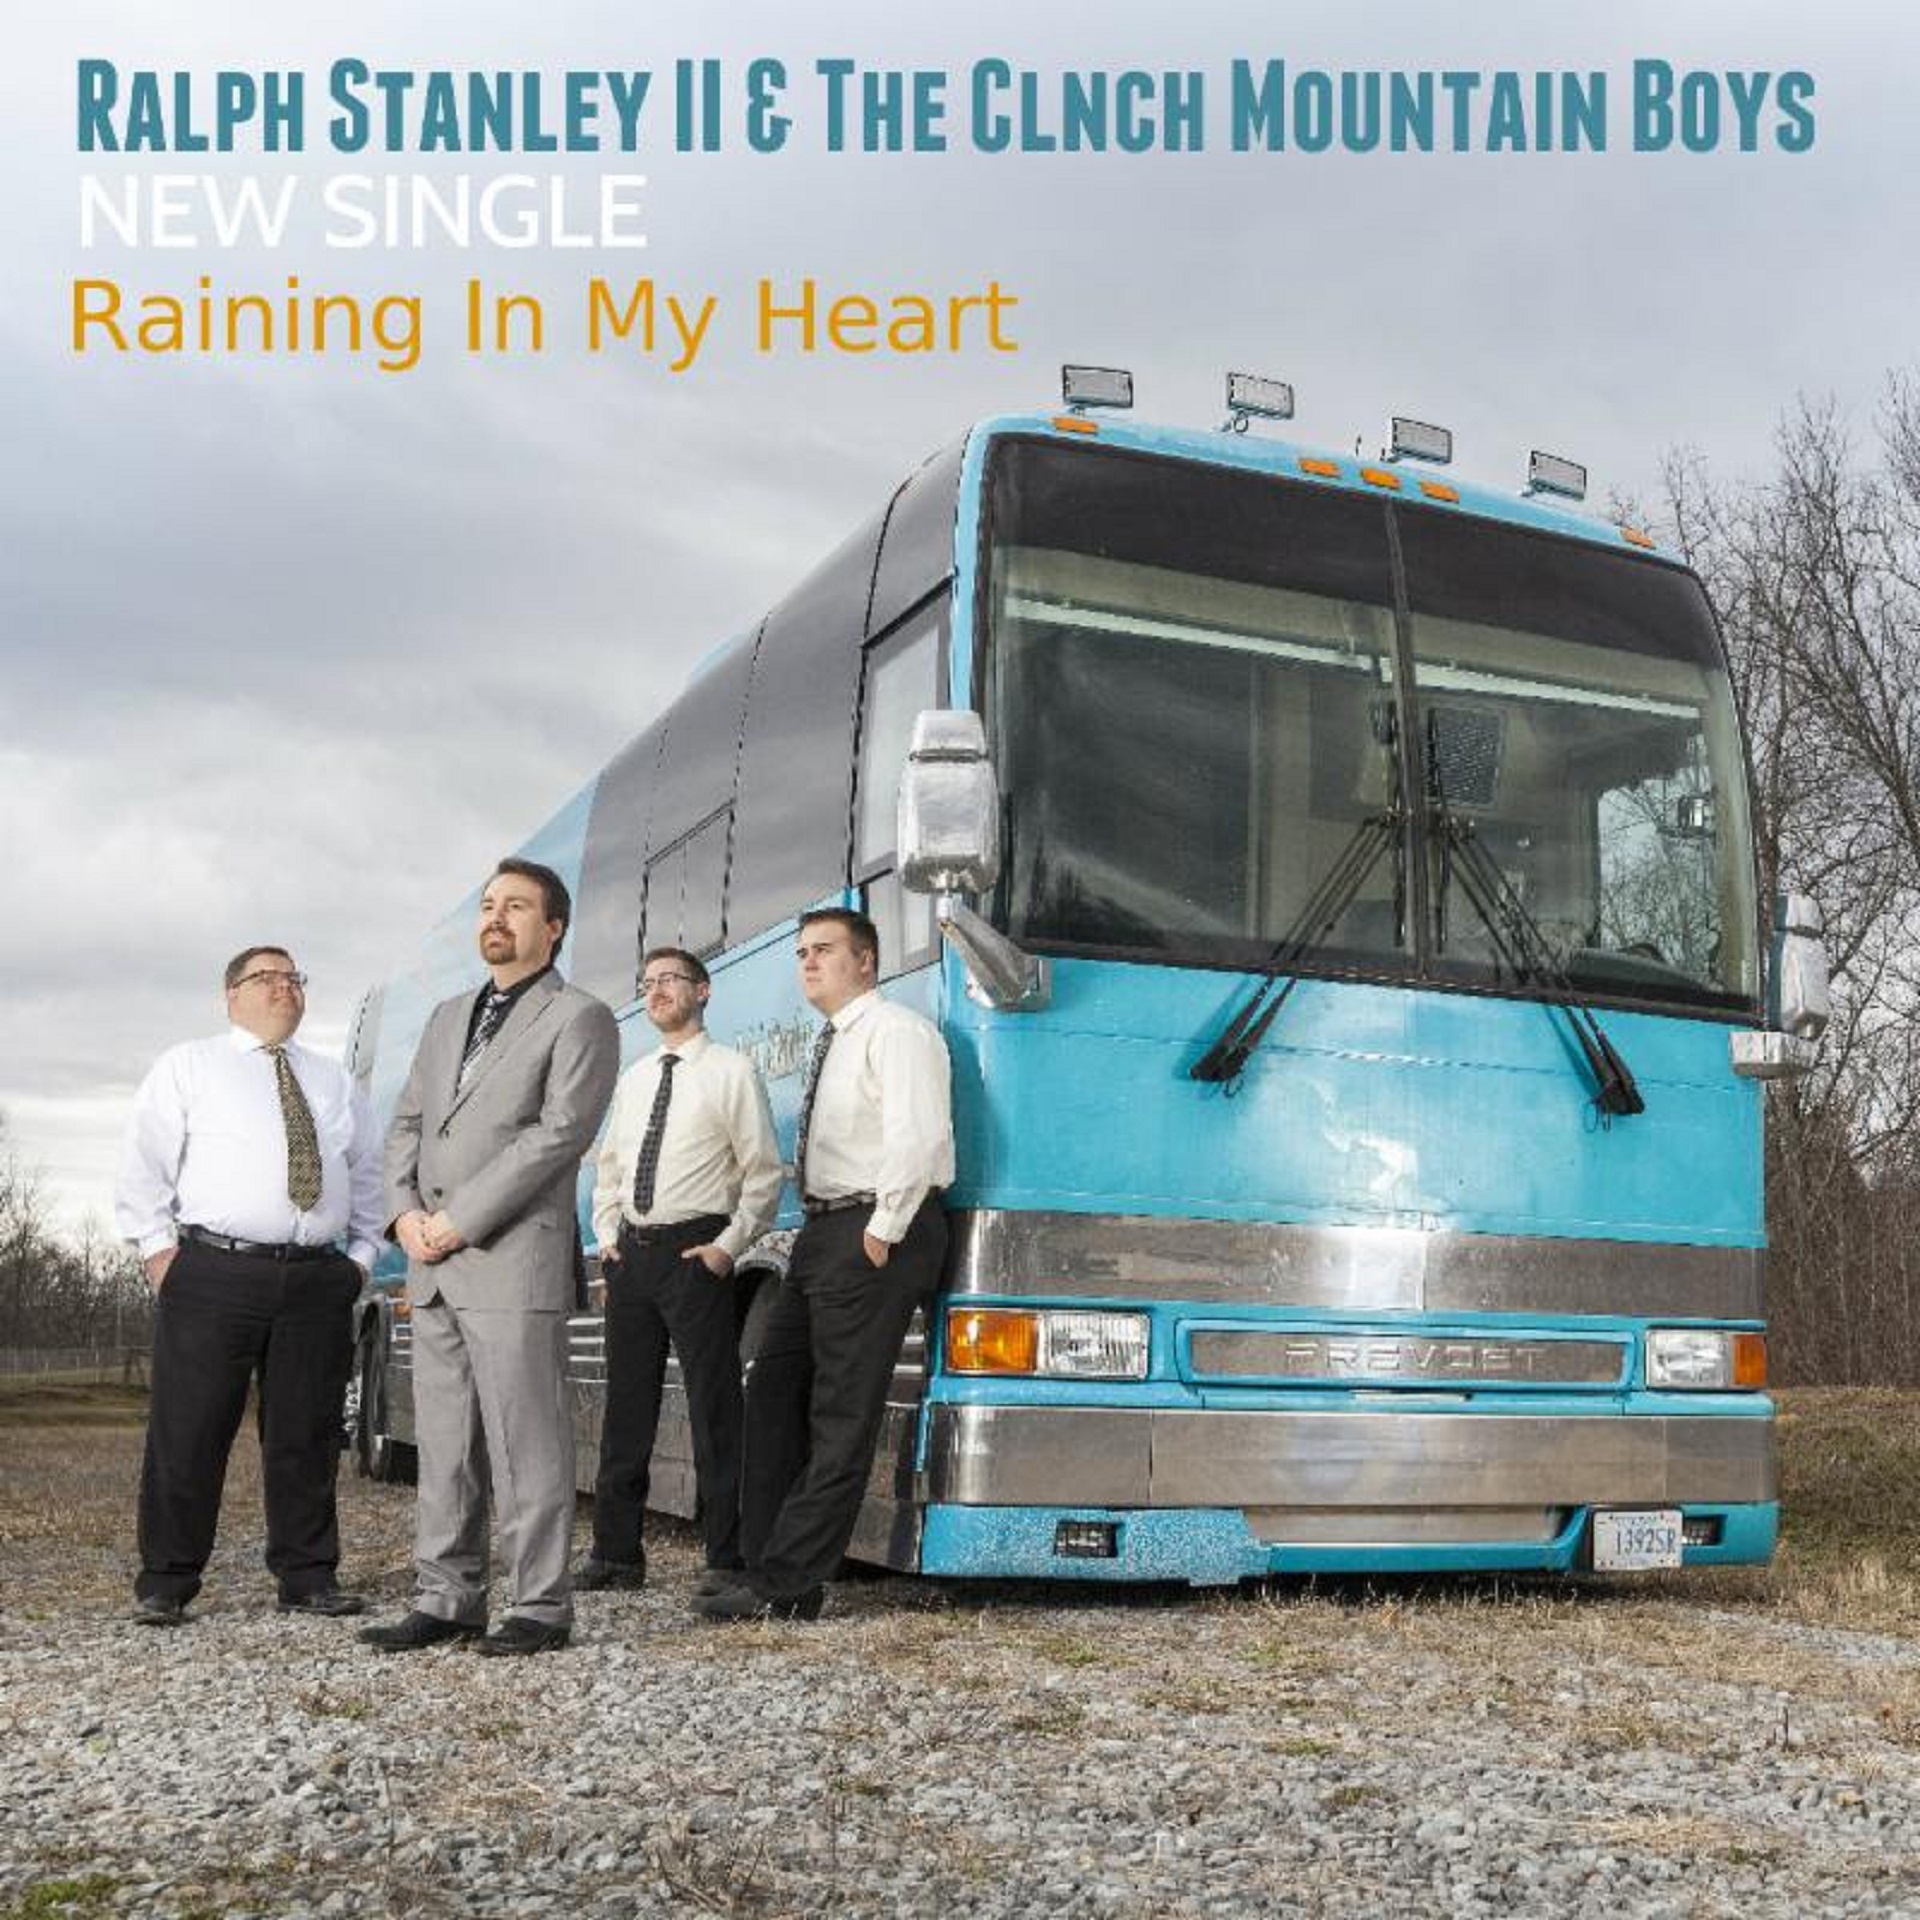 Ralph Stanley II & The Clinch Mountain Boys Release A New Single